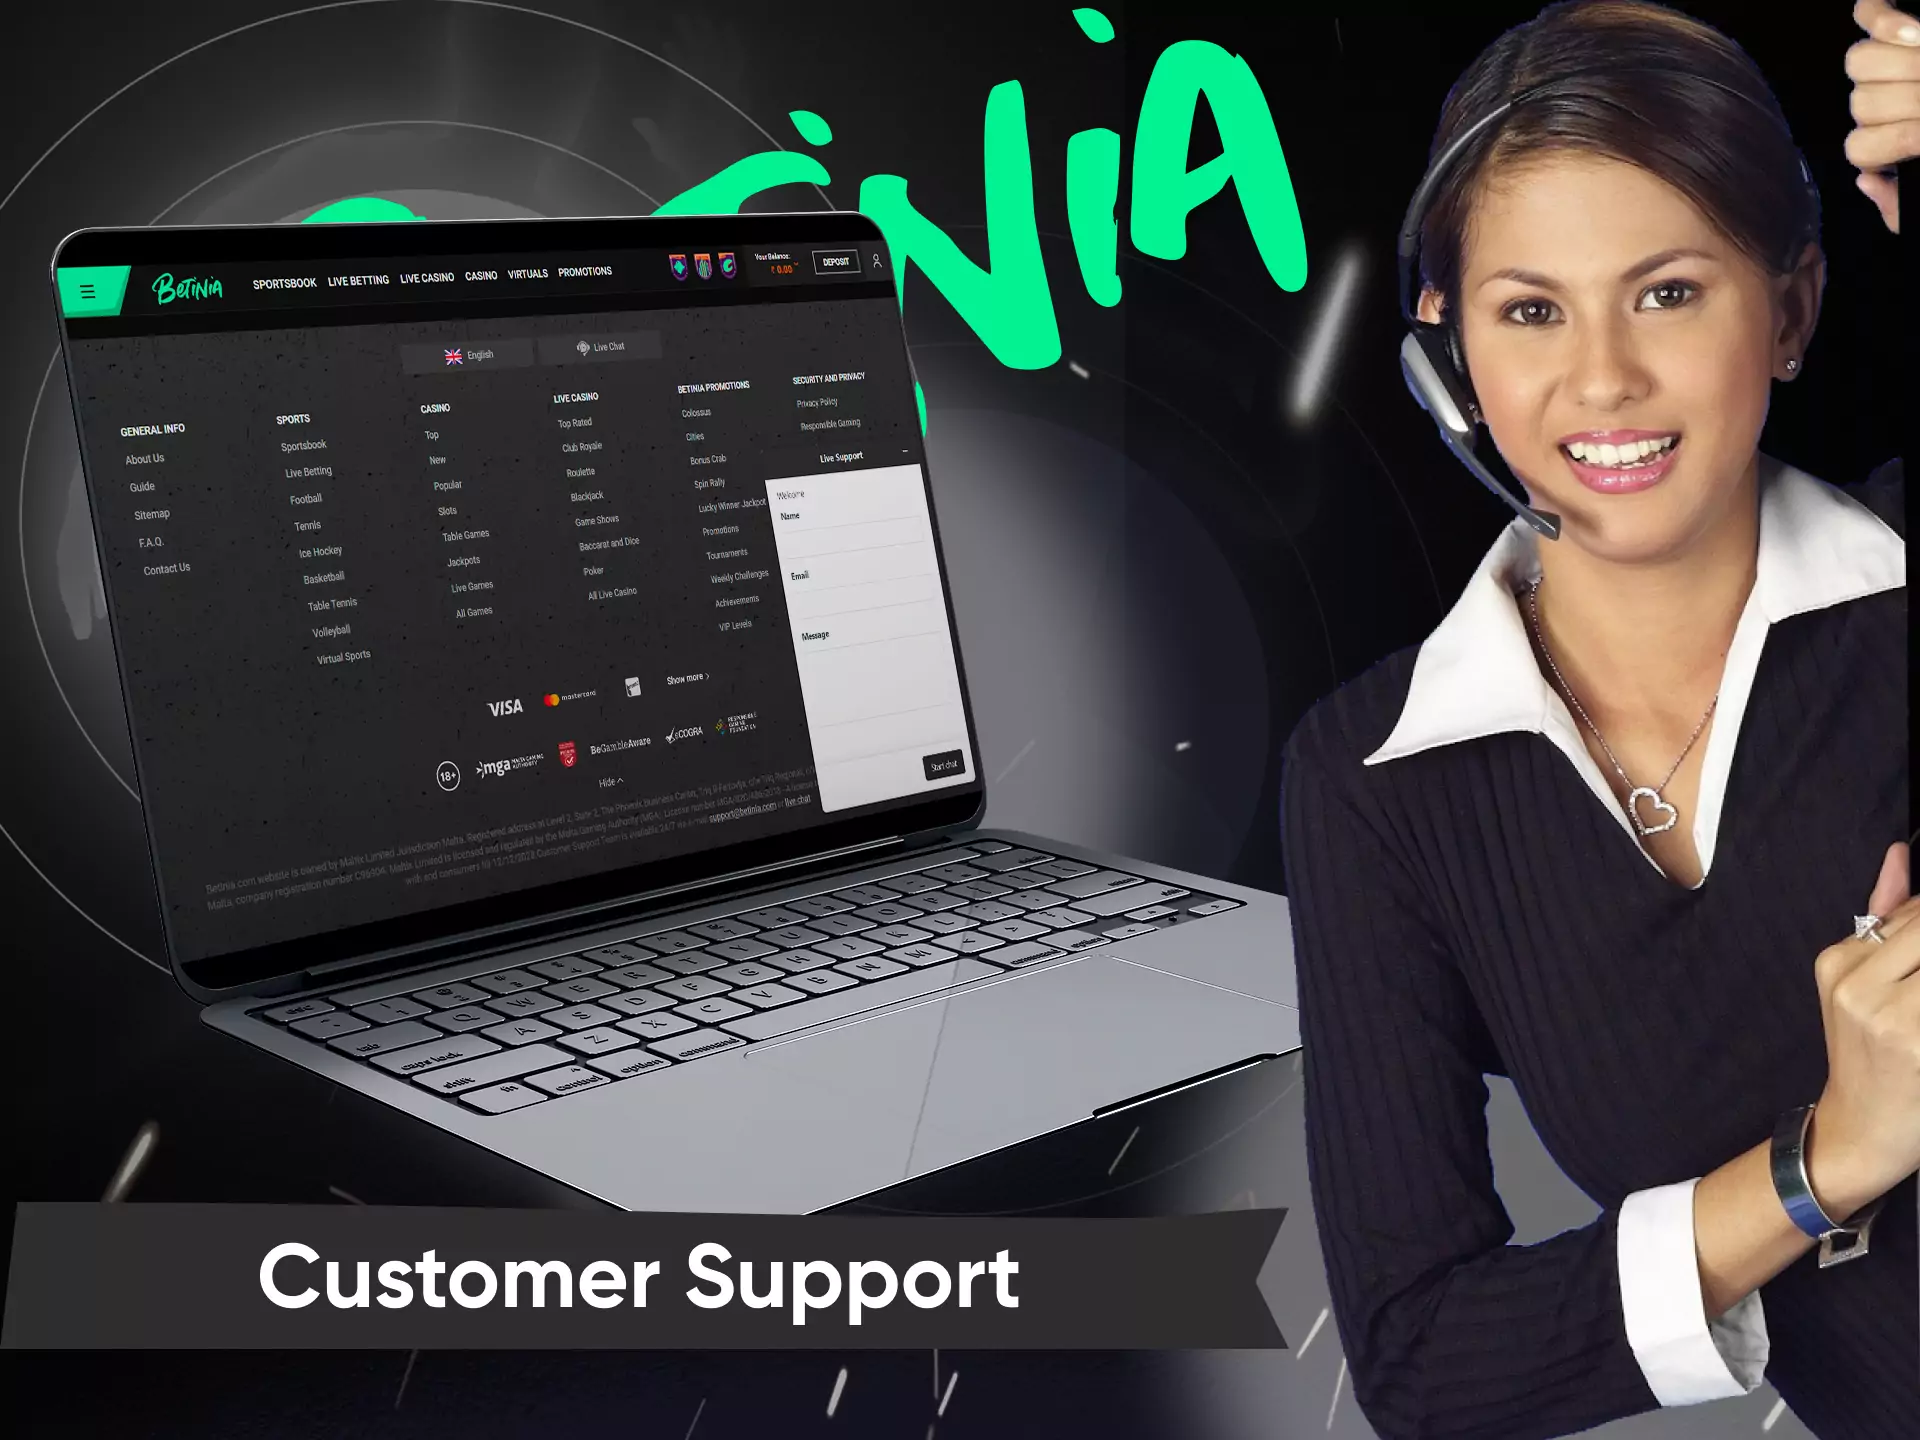 You can always ask customer support on the Betinia website.